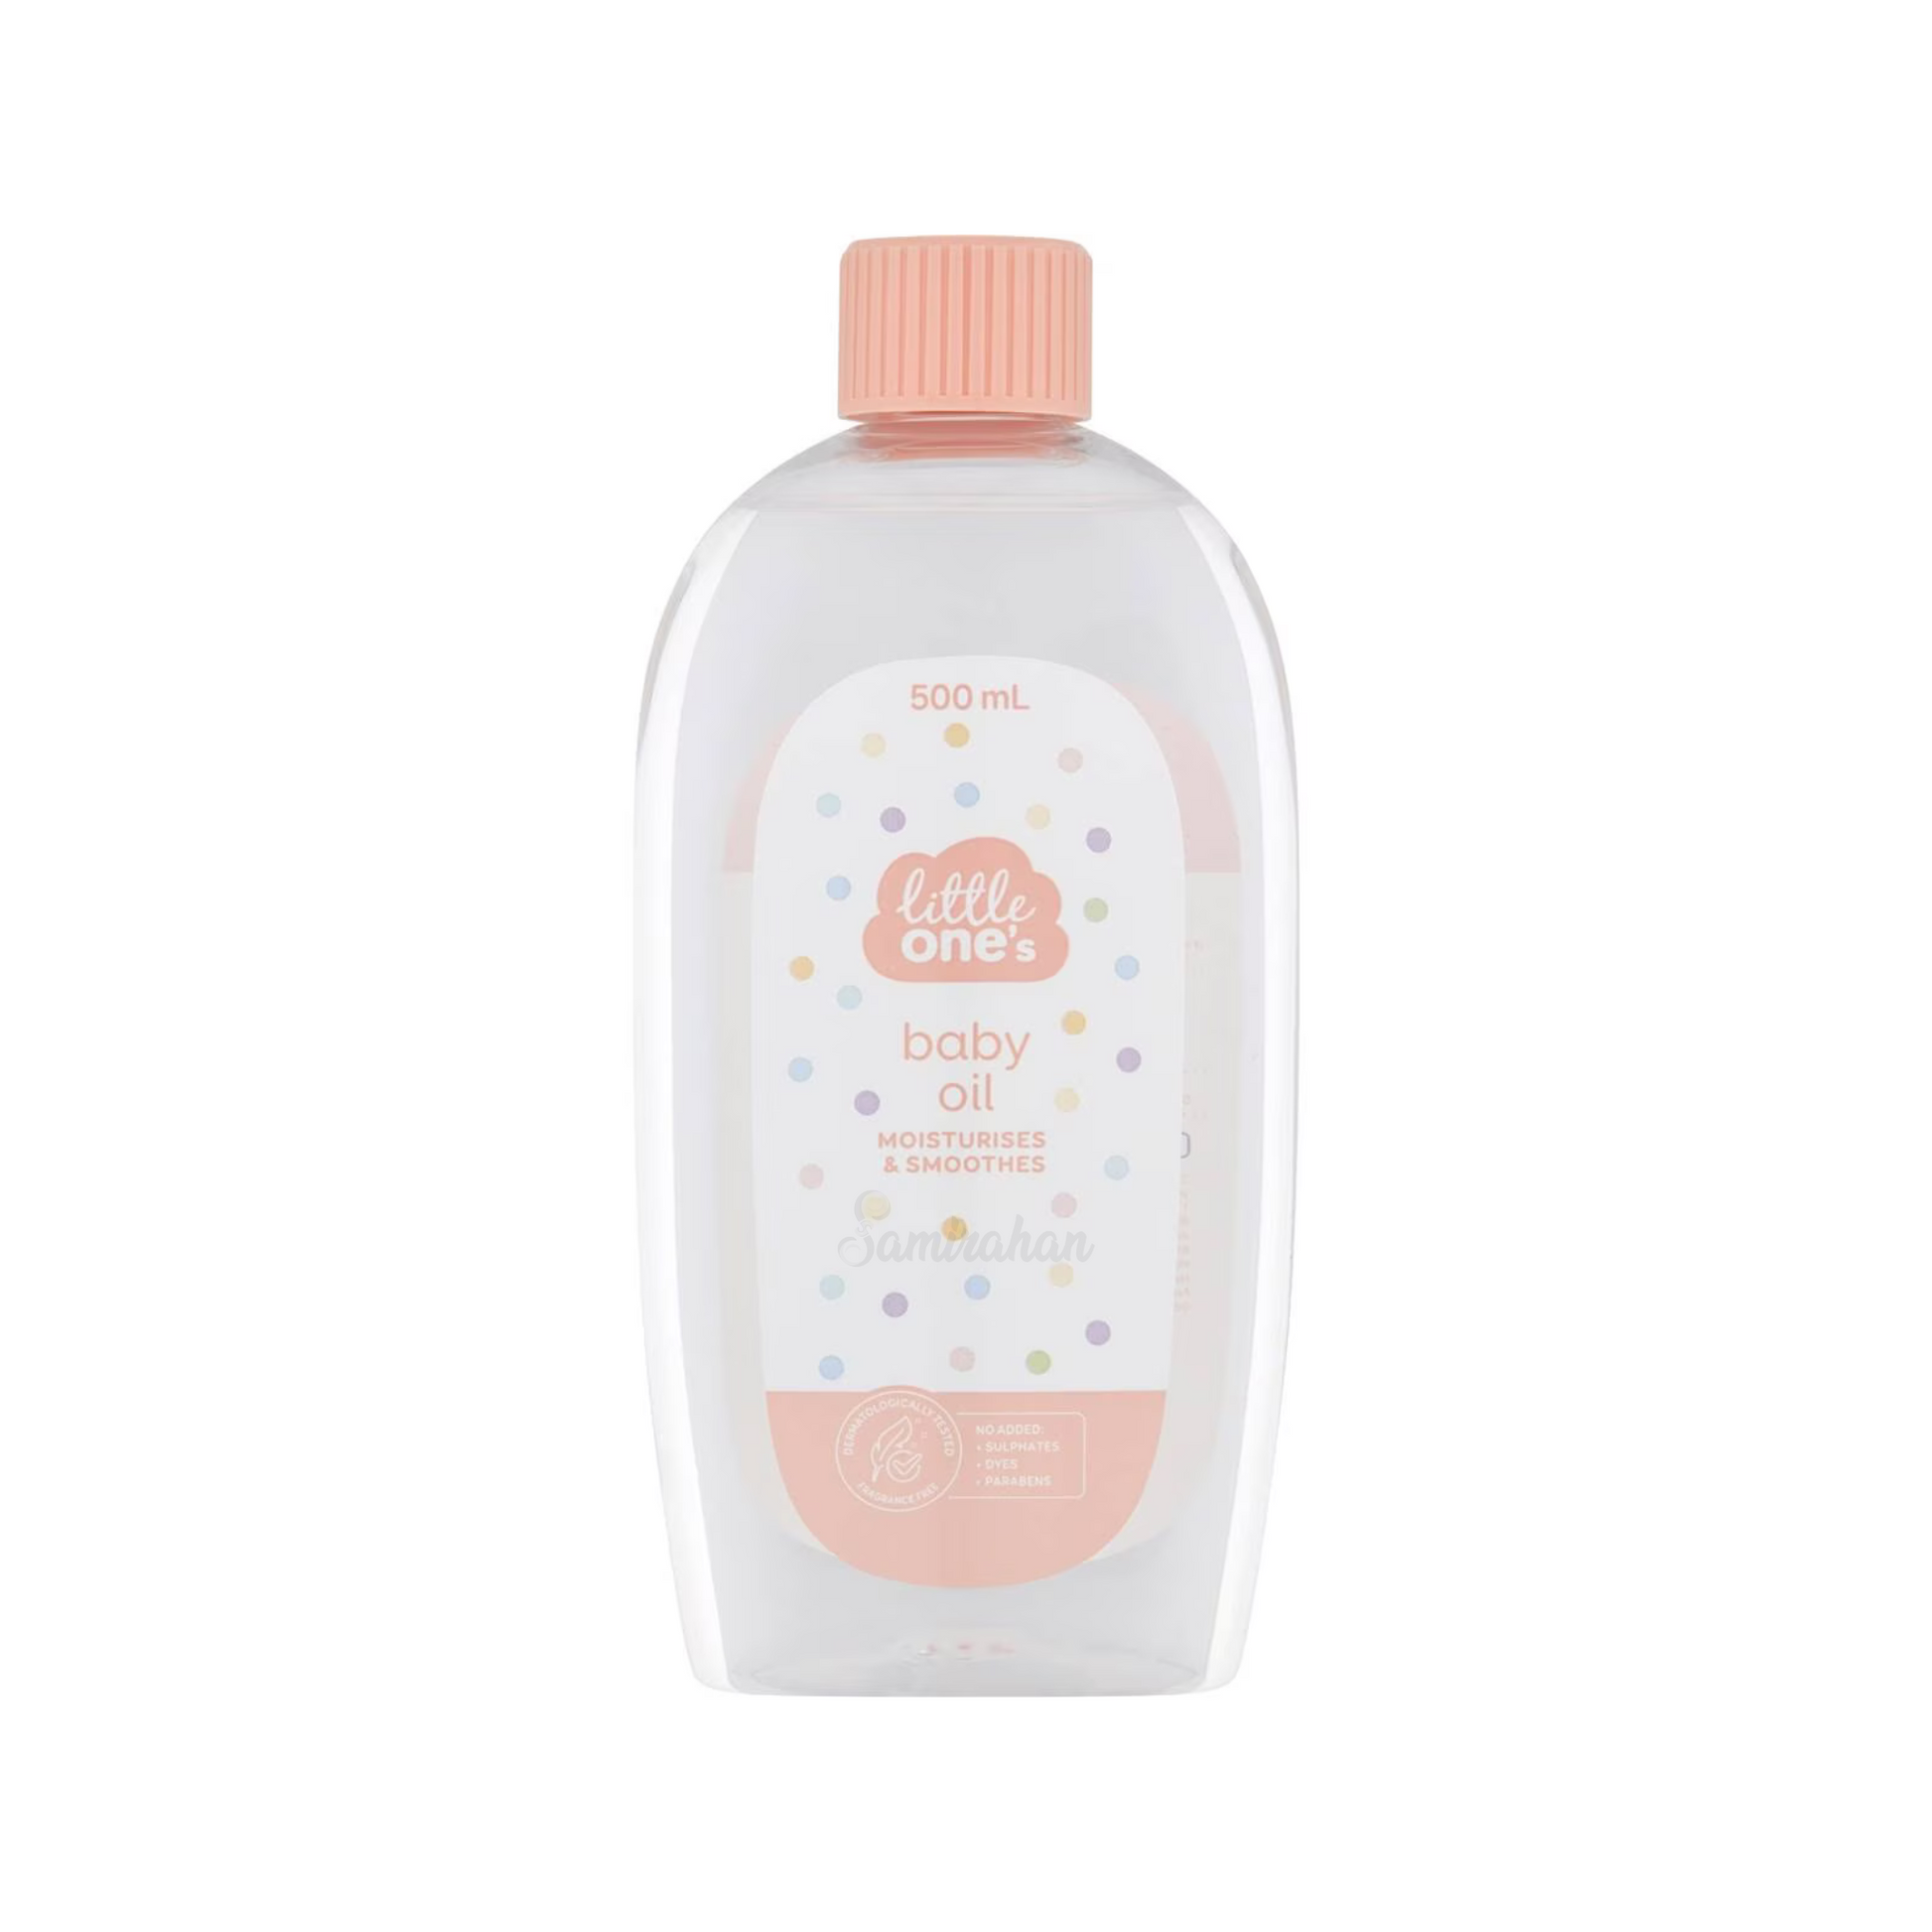 Little One's Baby Oil is a care oil that is great for moisturising & massaging baby, leaving baby's skin soft & soothed. Dermatologically tested & fragrance free. Best imported foreign Australian Aussie authentic genuine brand premium quality child infant toddler safe body price in Dhaka Chittagong Sylhet Bangladesh.